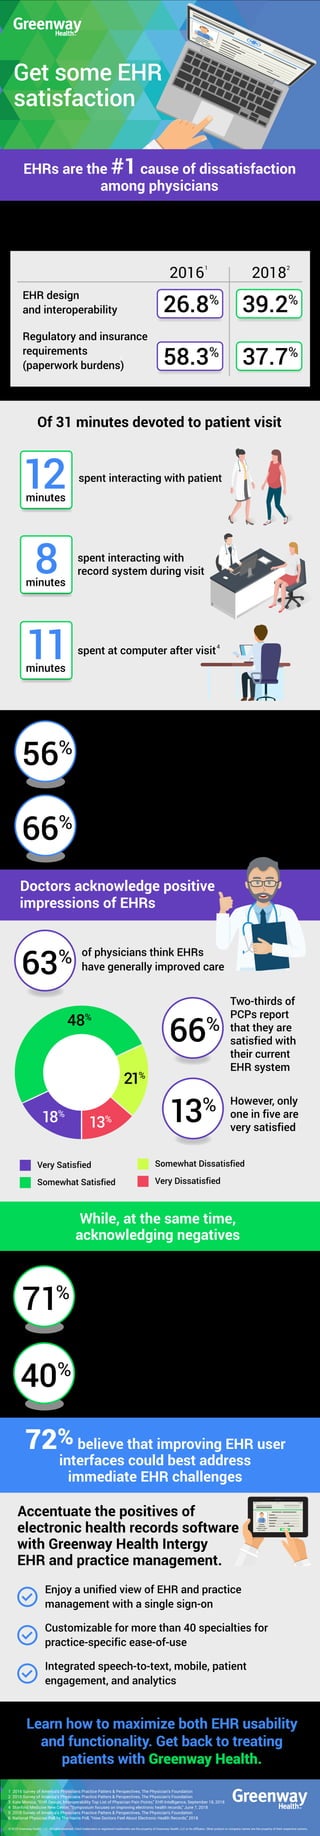 Get some EHR
satisfaction
EHRs are the #1 cause of dissatisfaction
among physicians
Doctors acknowledge positive
impressions of EHRs
Learn how to maximize both EHR usability
and functionality. Get back to treating
patients with Greenway Health.
26.8%
58.3%
37.7%
39.2%
39.2%
Of 31 minutes devoted to patient visit
72% believe that improving EHR user
interfaces could best address
immediate EHR challenges
spent interacting with patient
EHR design
and interoperability
Regulatory and insurance
requirements
(paperwork burdens)
What two factors do you find least satisfying
about medical practice?
12minutes
11minutes
8minutes
spent interacting with
record system during visit
spent at computer after visit
56% of physicians say EHR has had negative
effects in efficiency
63% of physicians think EHRs
have generally improved care
71% agree that EHRs greatly contribute
to burnout
40% believe there are more challenges than
benefits with EHRs
Enjoy a unified view of EHR and practice
management with a single sign-on
of physicians say EHR has had negative
effects on patient interaction
13% However, only
one in five are
very satisfied
Very Satisfied
Somewhat Satisfied
Somewhat Dissatisfied
Very Dissatisfied
While, at the same time,
acknowledging negatives
© 2019 Greenway Health, LLC. All rights reserved. Cited trademarks or registered trademarks are the property of Greenway Health, LLC or its affiliates. Other product or company names are the property of their respective owners.
1 2016 Survey of America’s Physicians Practice Patters & Perspectives, The Physician’s Foundation
2 2018 Survey of America’s Physicians Practice Patters & Perspectives, The Physician’s Foundation
3 Kate Monica, “EHR Design, Interoperability Top List of Physician Pain Points,” EHR Intelligence, September 18, 2018
4 Stanford Medicine New Center, “Symposium focuses on improving electronic health records,” June 7, 2018
5 2018 Survey of America’s Physicians Practice Patters & Perspectives, The Physician’s Foundation
6 National Physician Poll by The Harris Poll, “How Doctors Feel About Electronic Health Records,” 2018
2
1 2
4
5
6
2016 2018
13%
21%
48%
18%
66%
Two-thirds of
PCPs report
that they are
satisfied with
their current
EHR system
Accentuate the positives of
electronic health records software
with Greenway Health Intergy
EHR and practice management.
Customizable for more than 40 specialties for
practice-specific ease-of-use
Integrated speech-to-text, mobile, patient
engagement, and analytics
66%
 